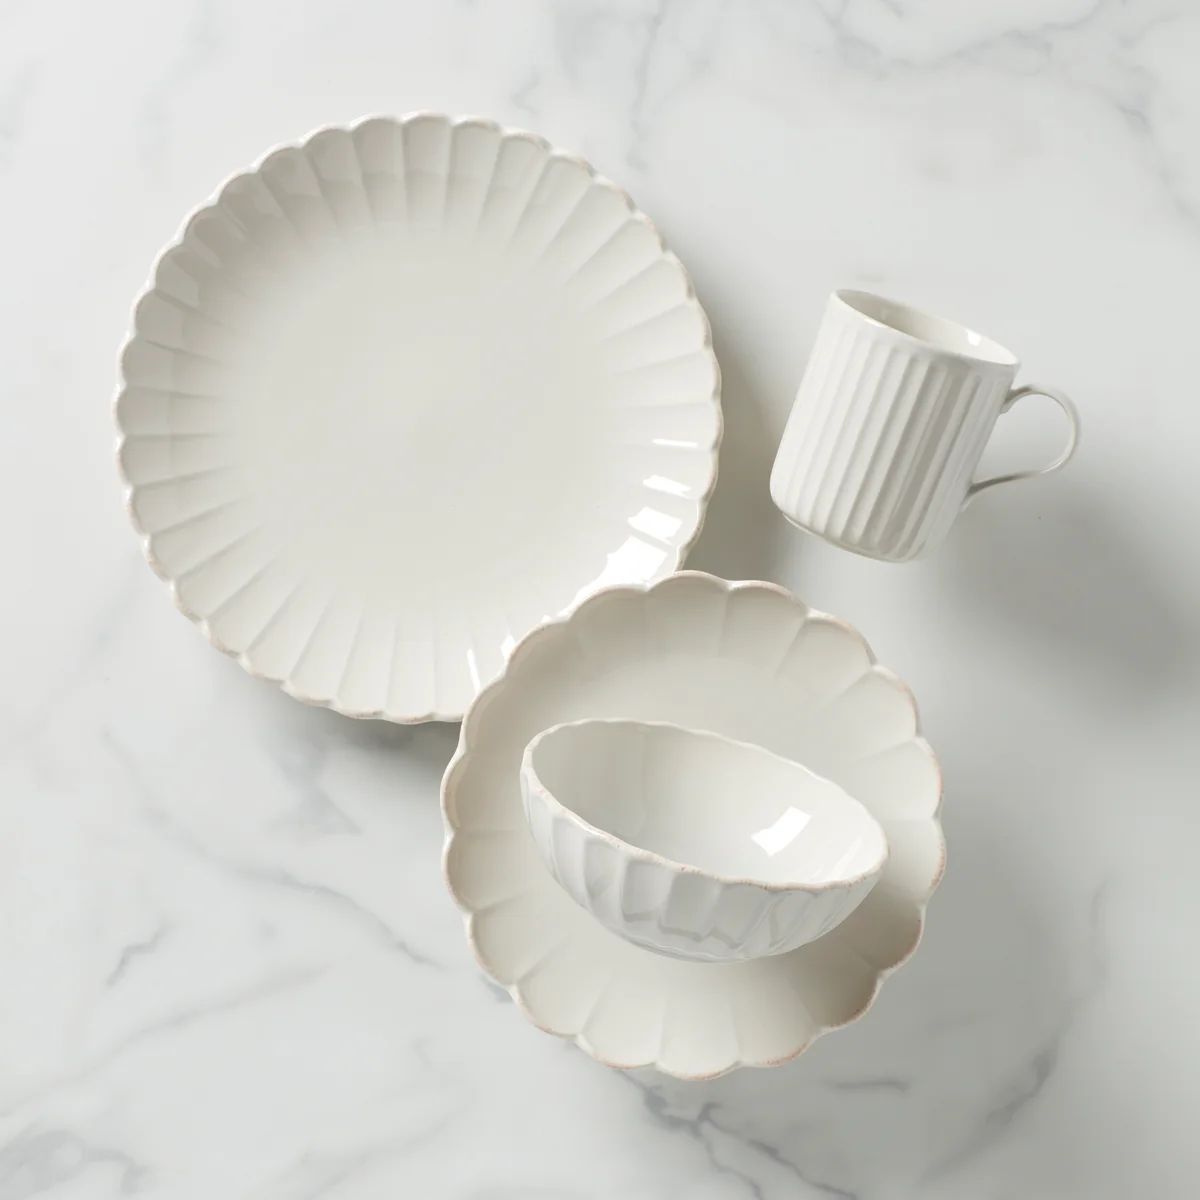 French Perle Scallop 4-Piece Place Setting | Lenox